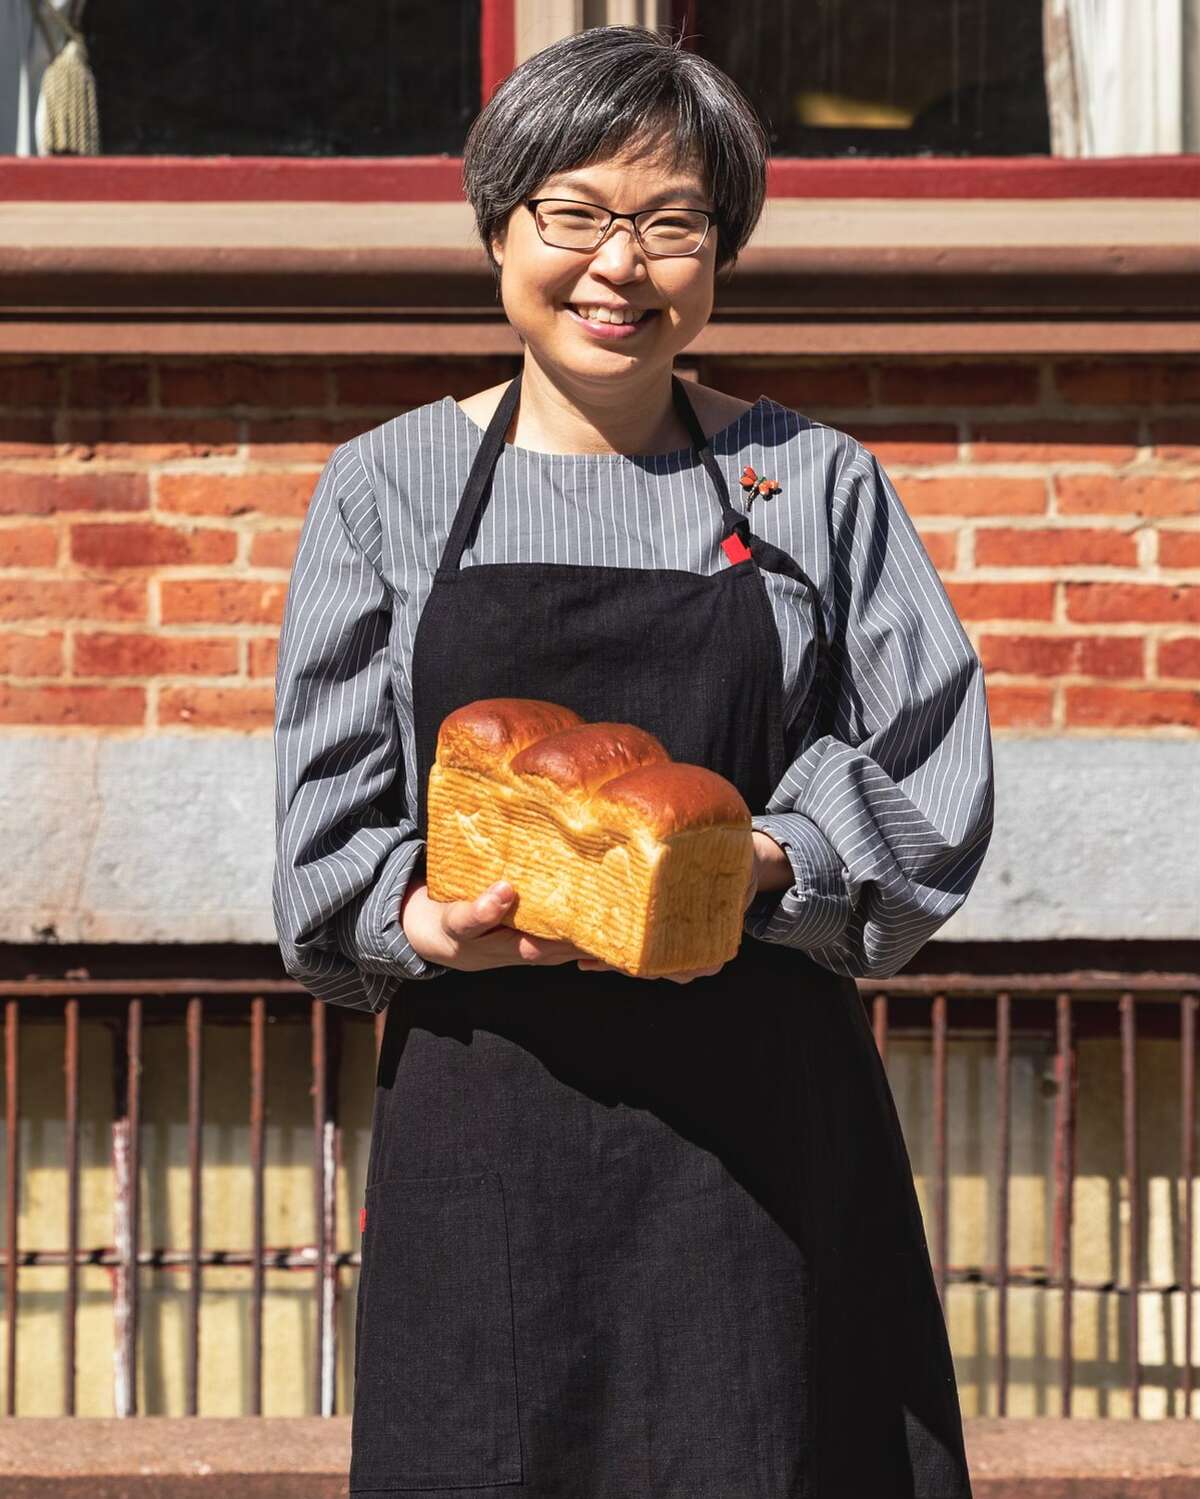 Sookyung Lee, owner of Ppang Bakery, with a loaf of milk bread.